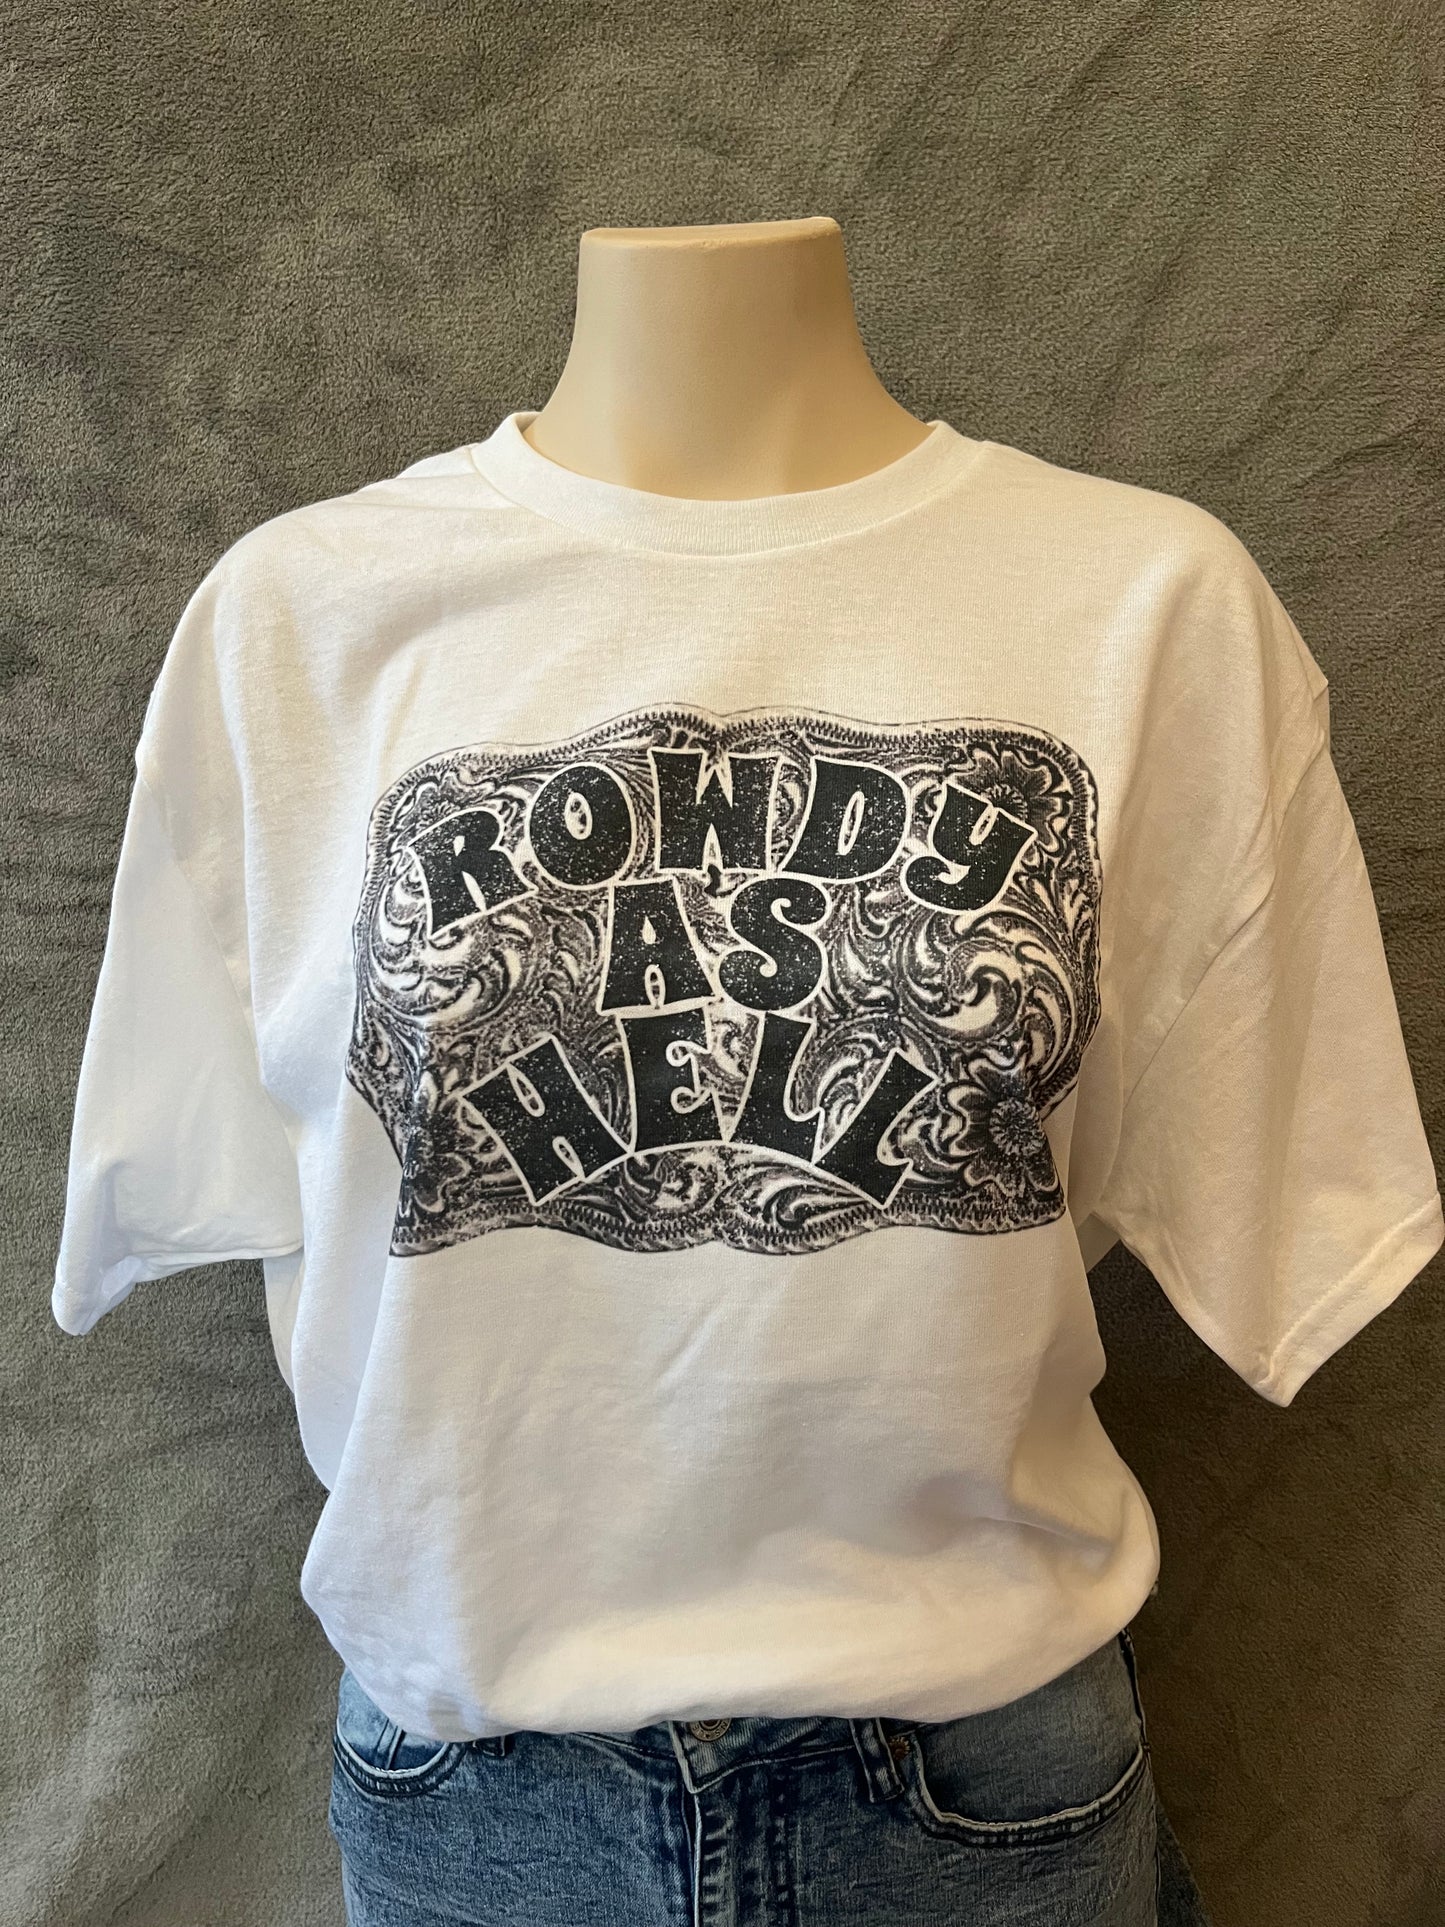 Rowdy As Hell Graphic T-shirt